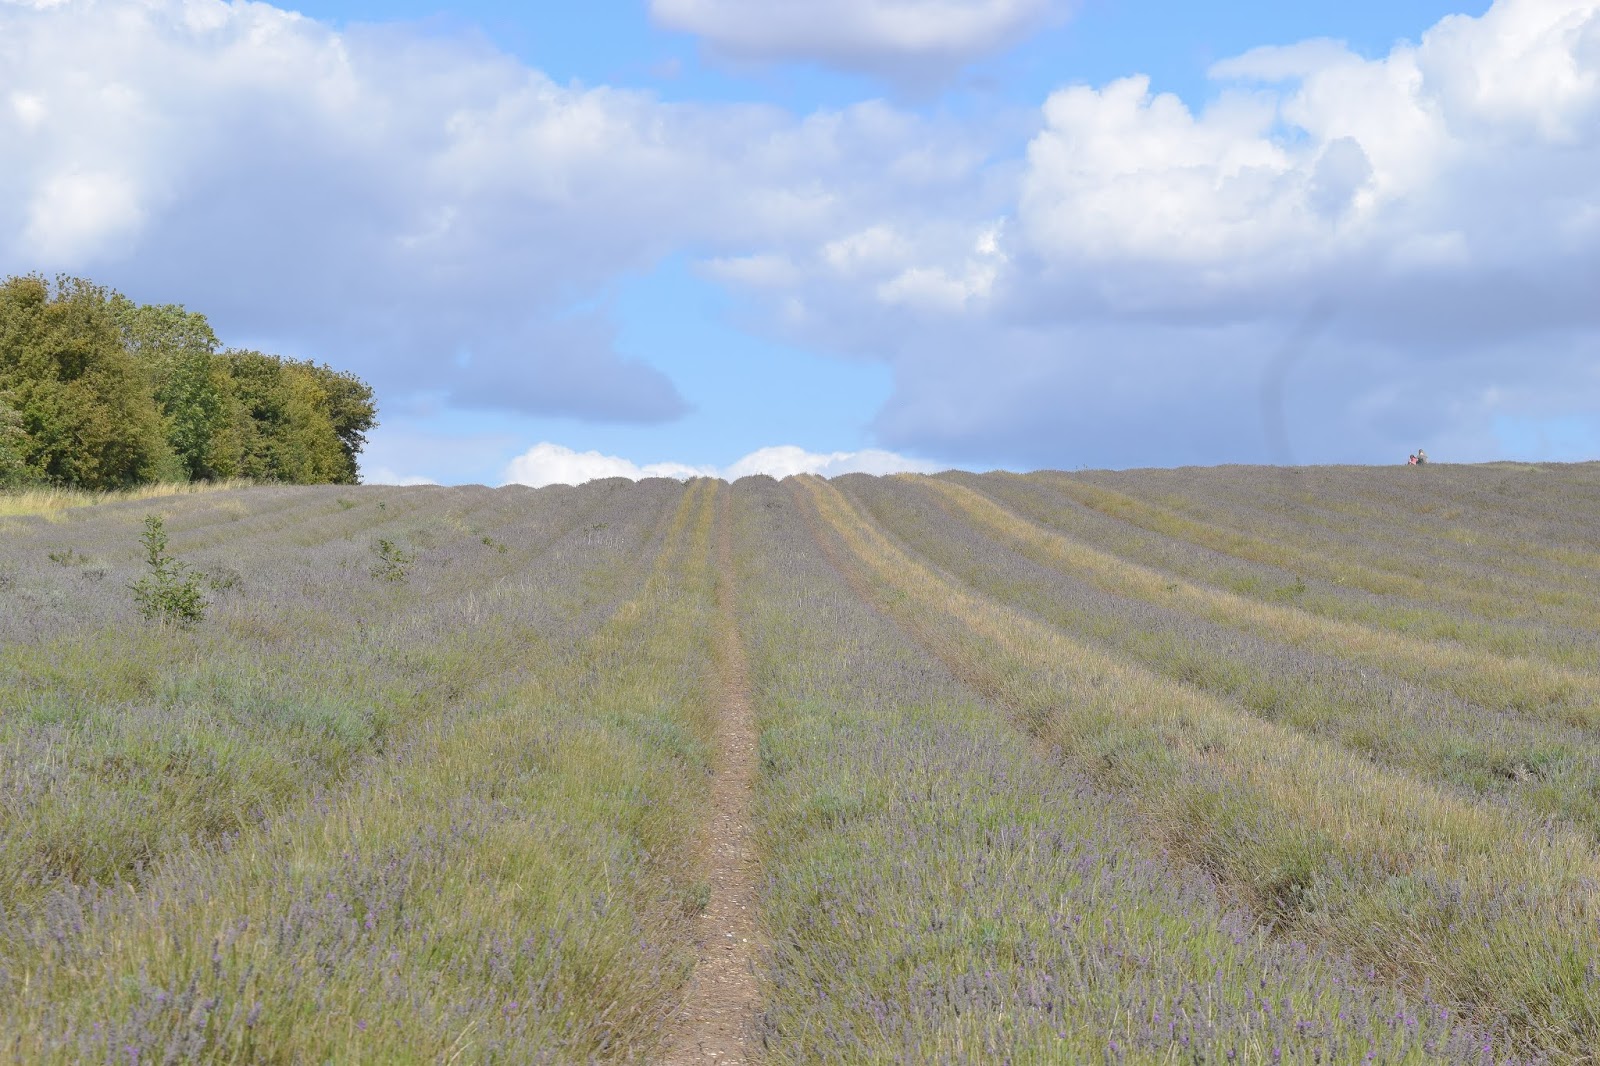 A landscape of a lavender field with clouds scattered in the sky and high green bushes along the edge of the field.